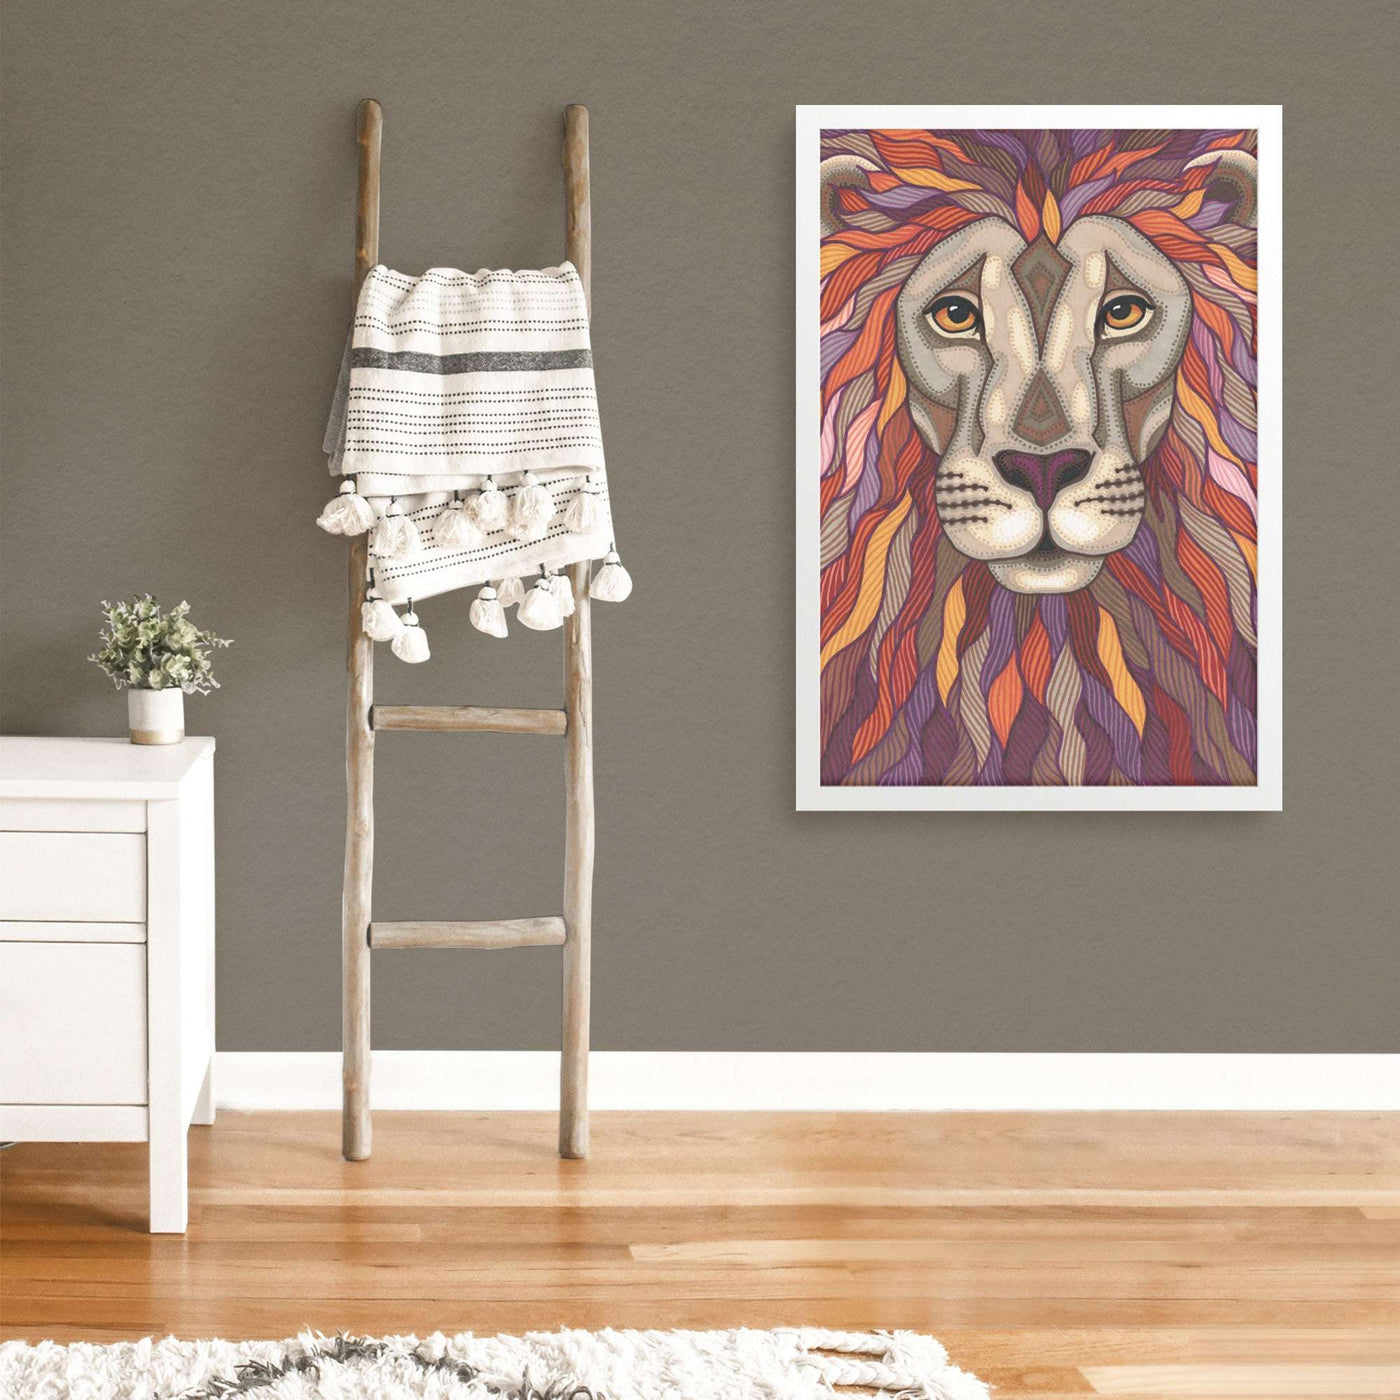 A modern room with gray walls featuring a Lion Pride Framed Print, a white cabinet, a wooden ladder with a blanket, and a small plant.